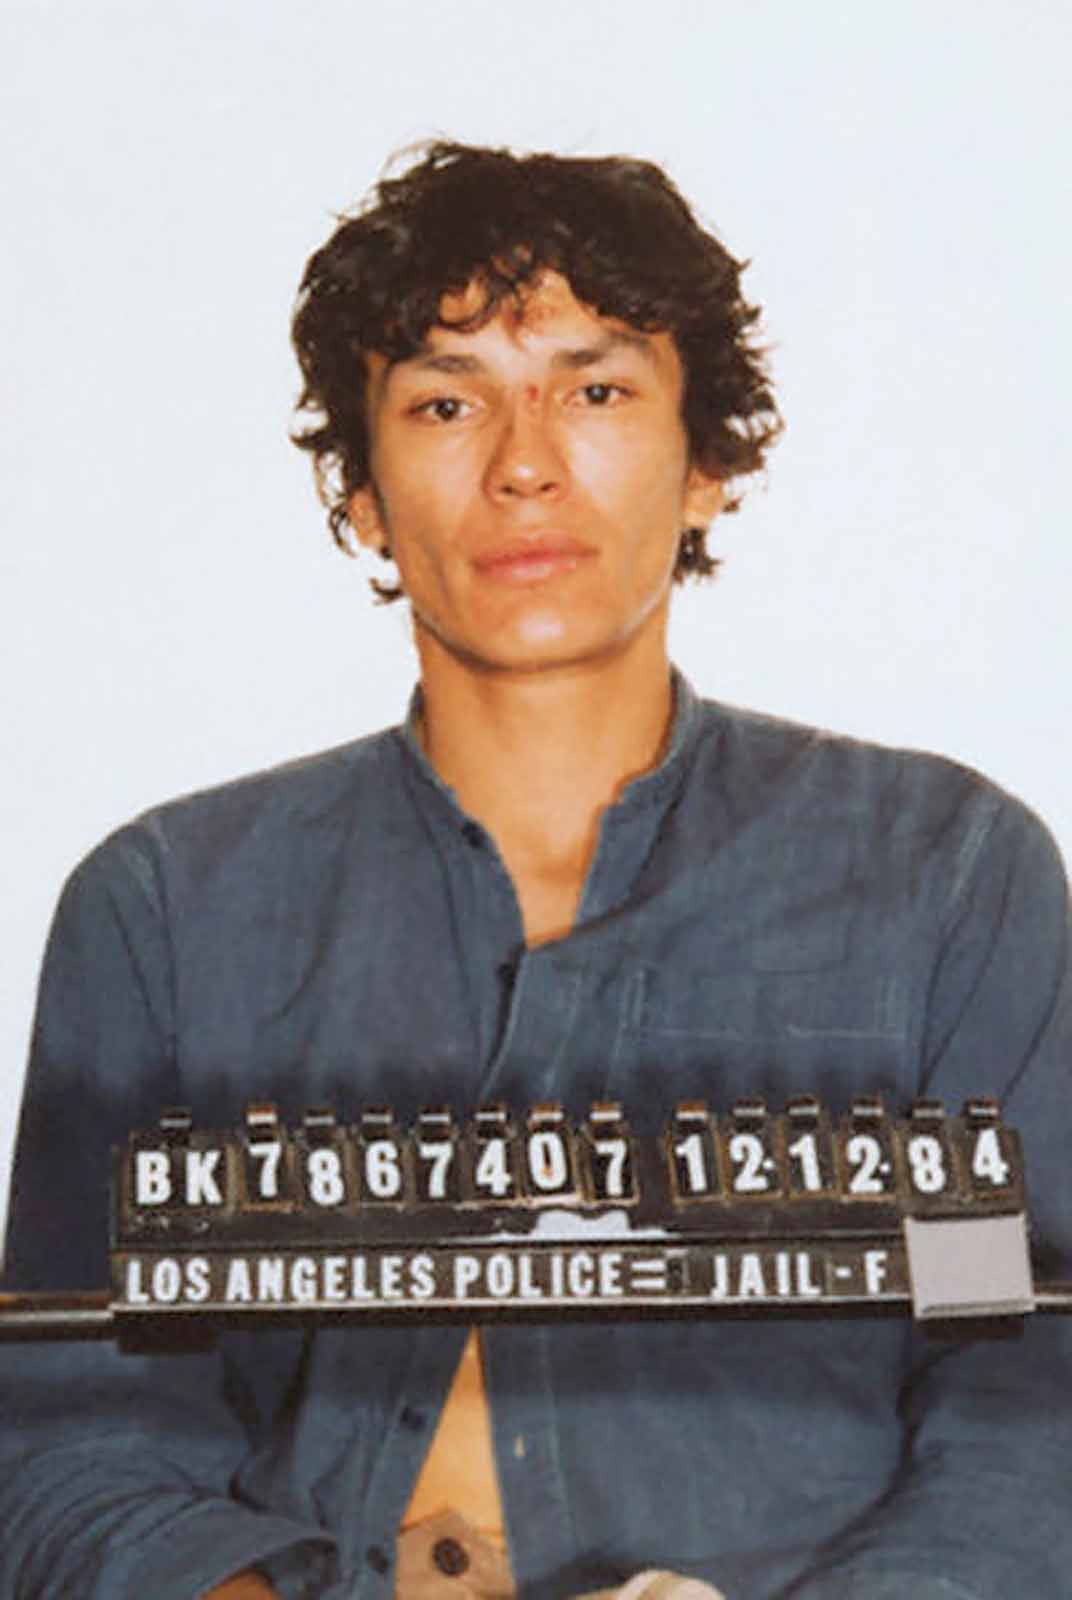 The Night Stalker terrorized LA and San Francisco for nearly two years. But the community were the ones to finally take him down when he messed up.